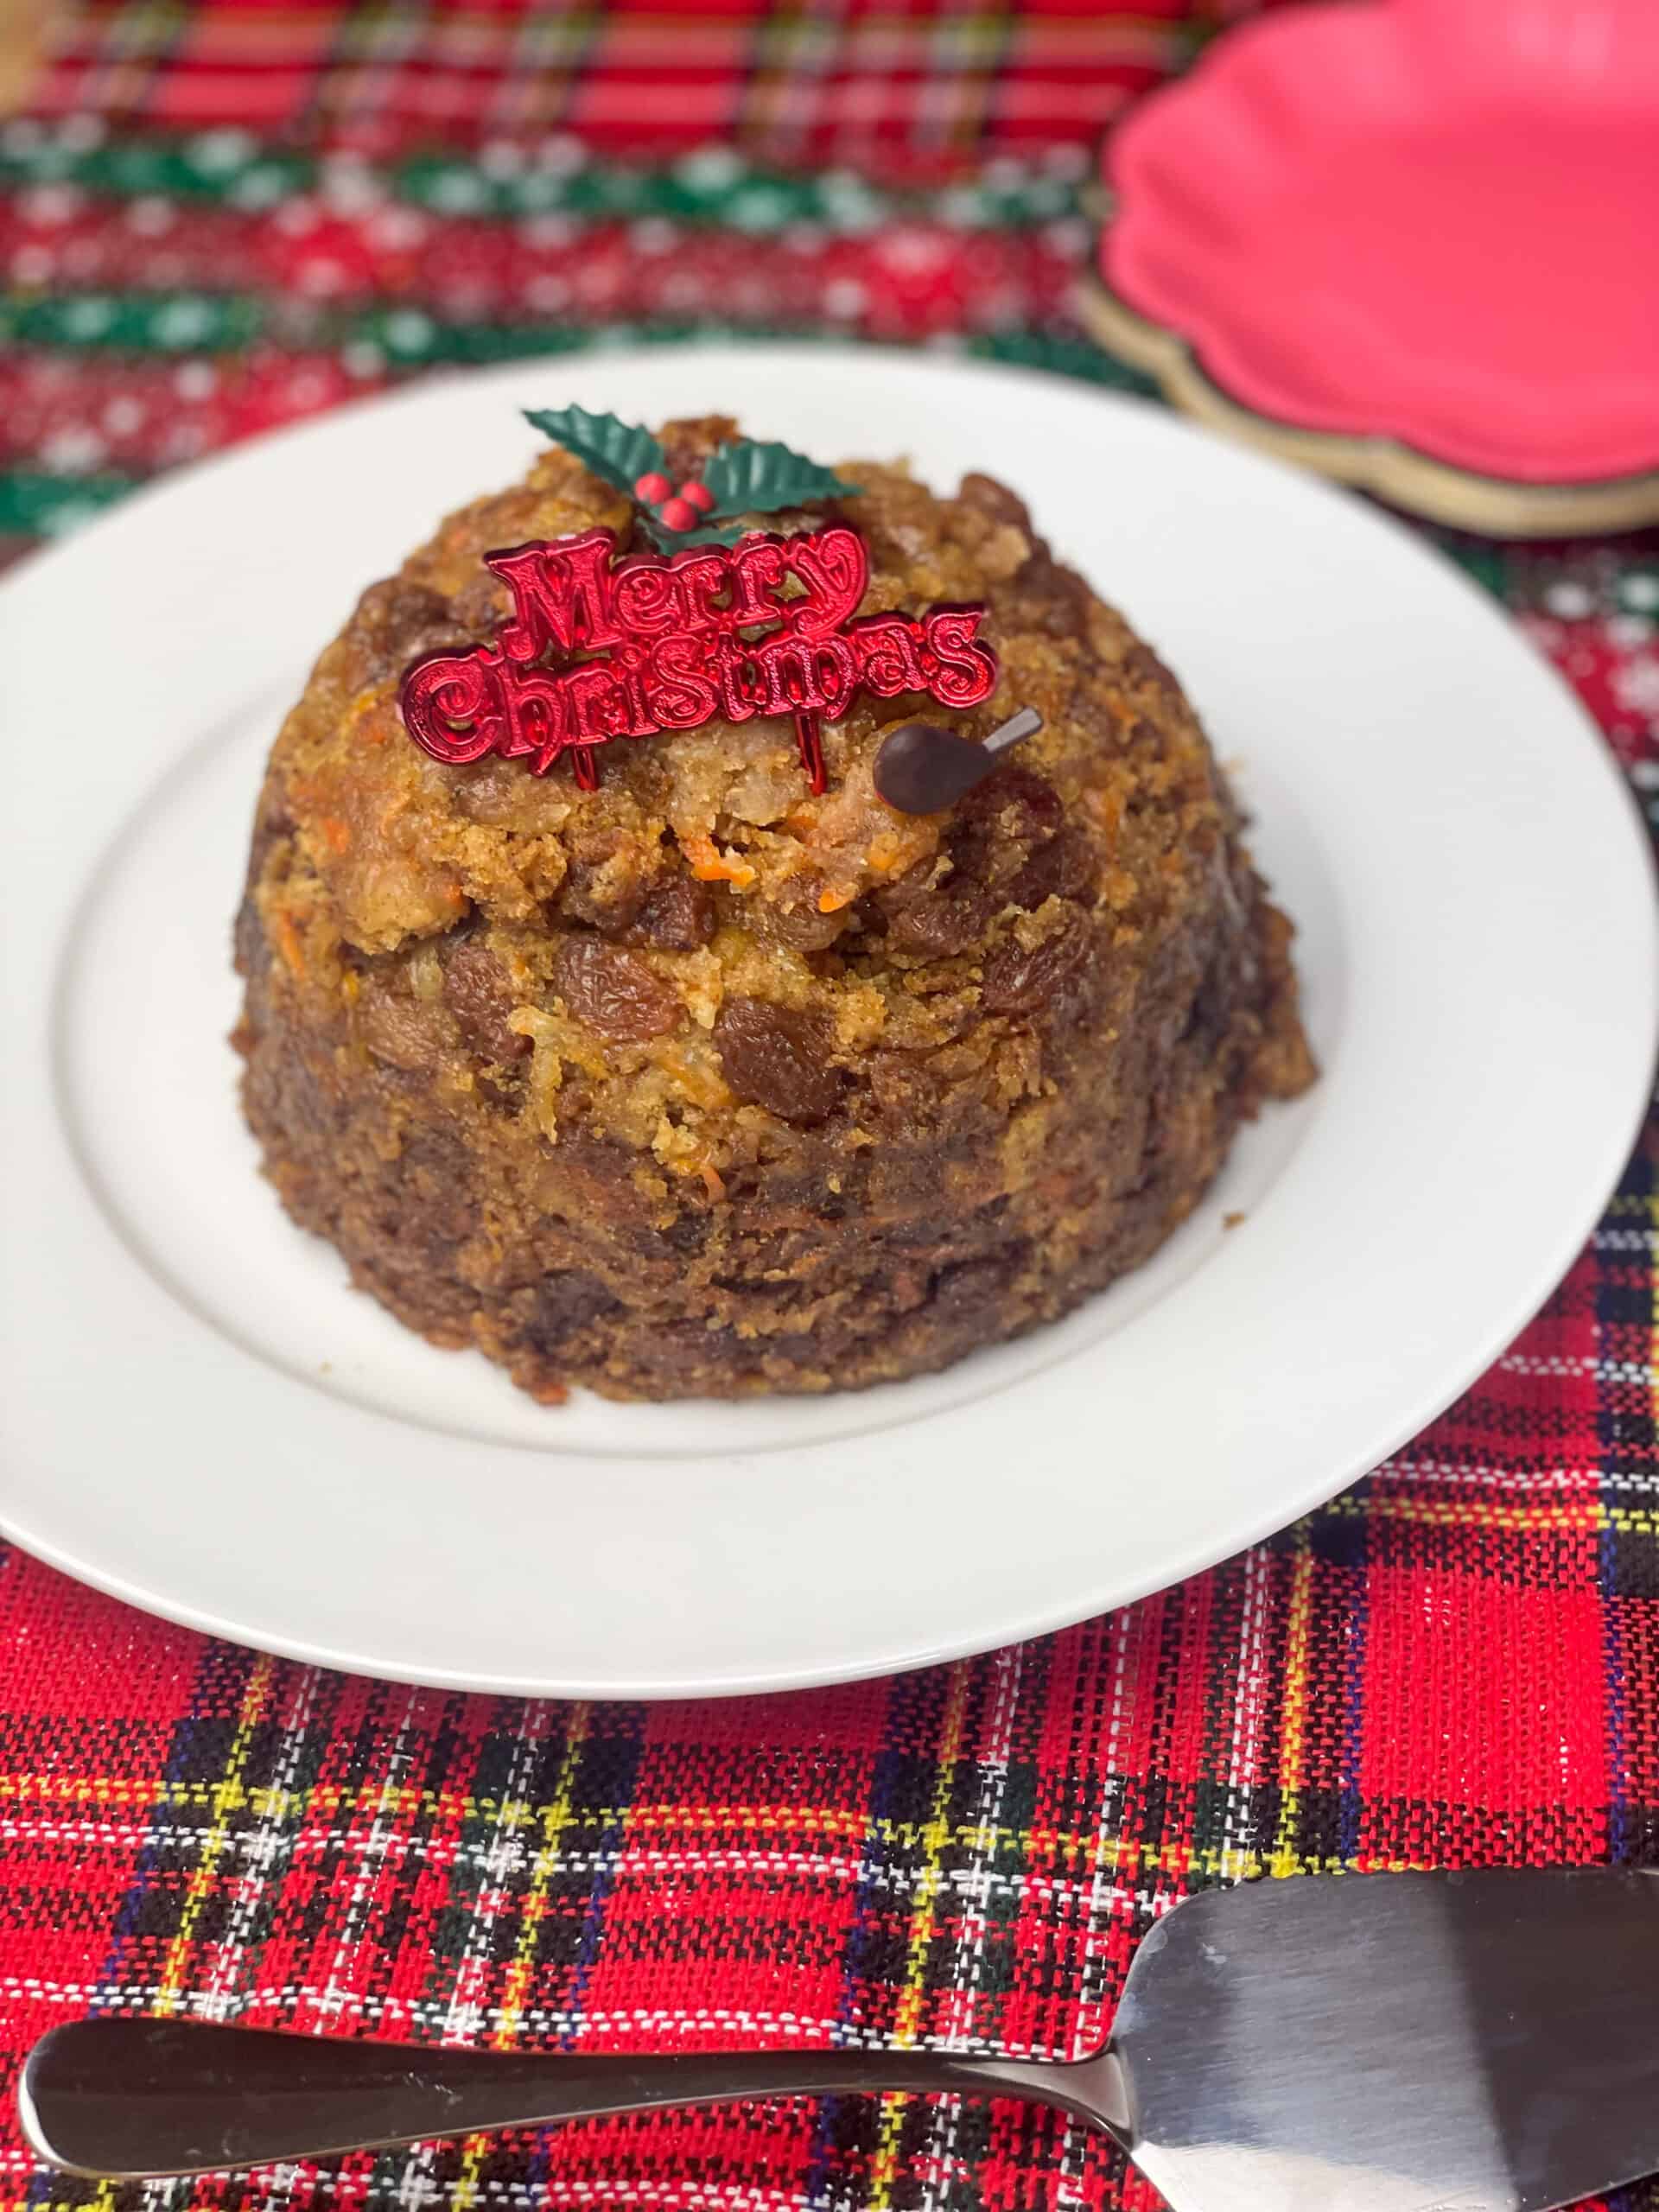 Christmas pudding sitting on white plate with red merry Christmas sign and little holly ornament, red tartan background.